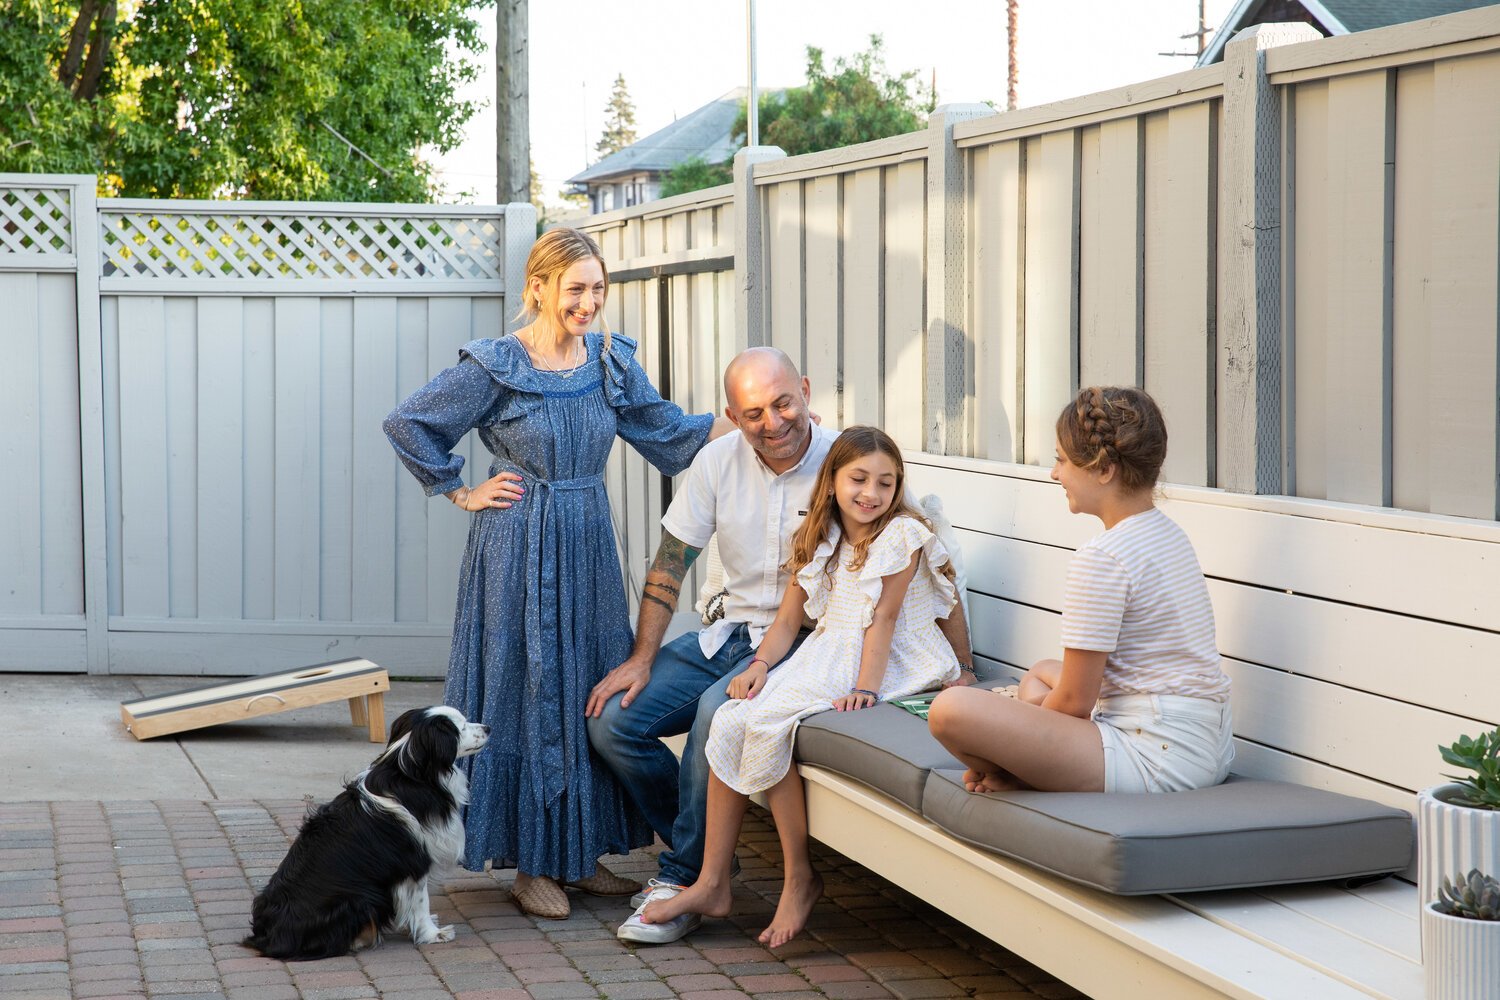 A family of four and their dog sitting in an outdoor sitting area in a fenced yard